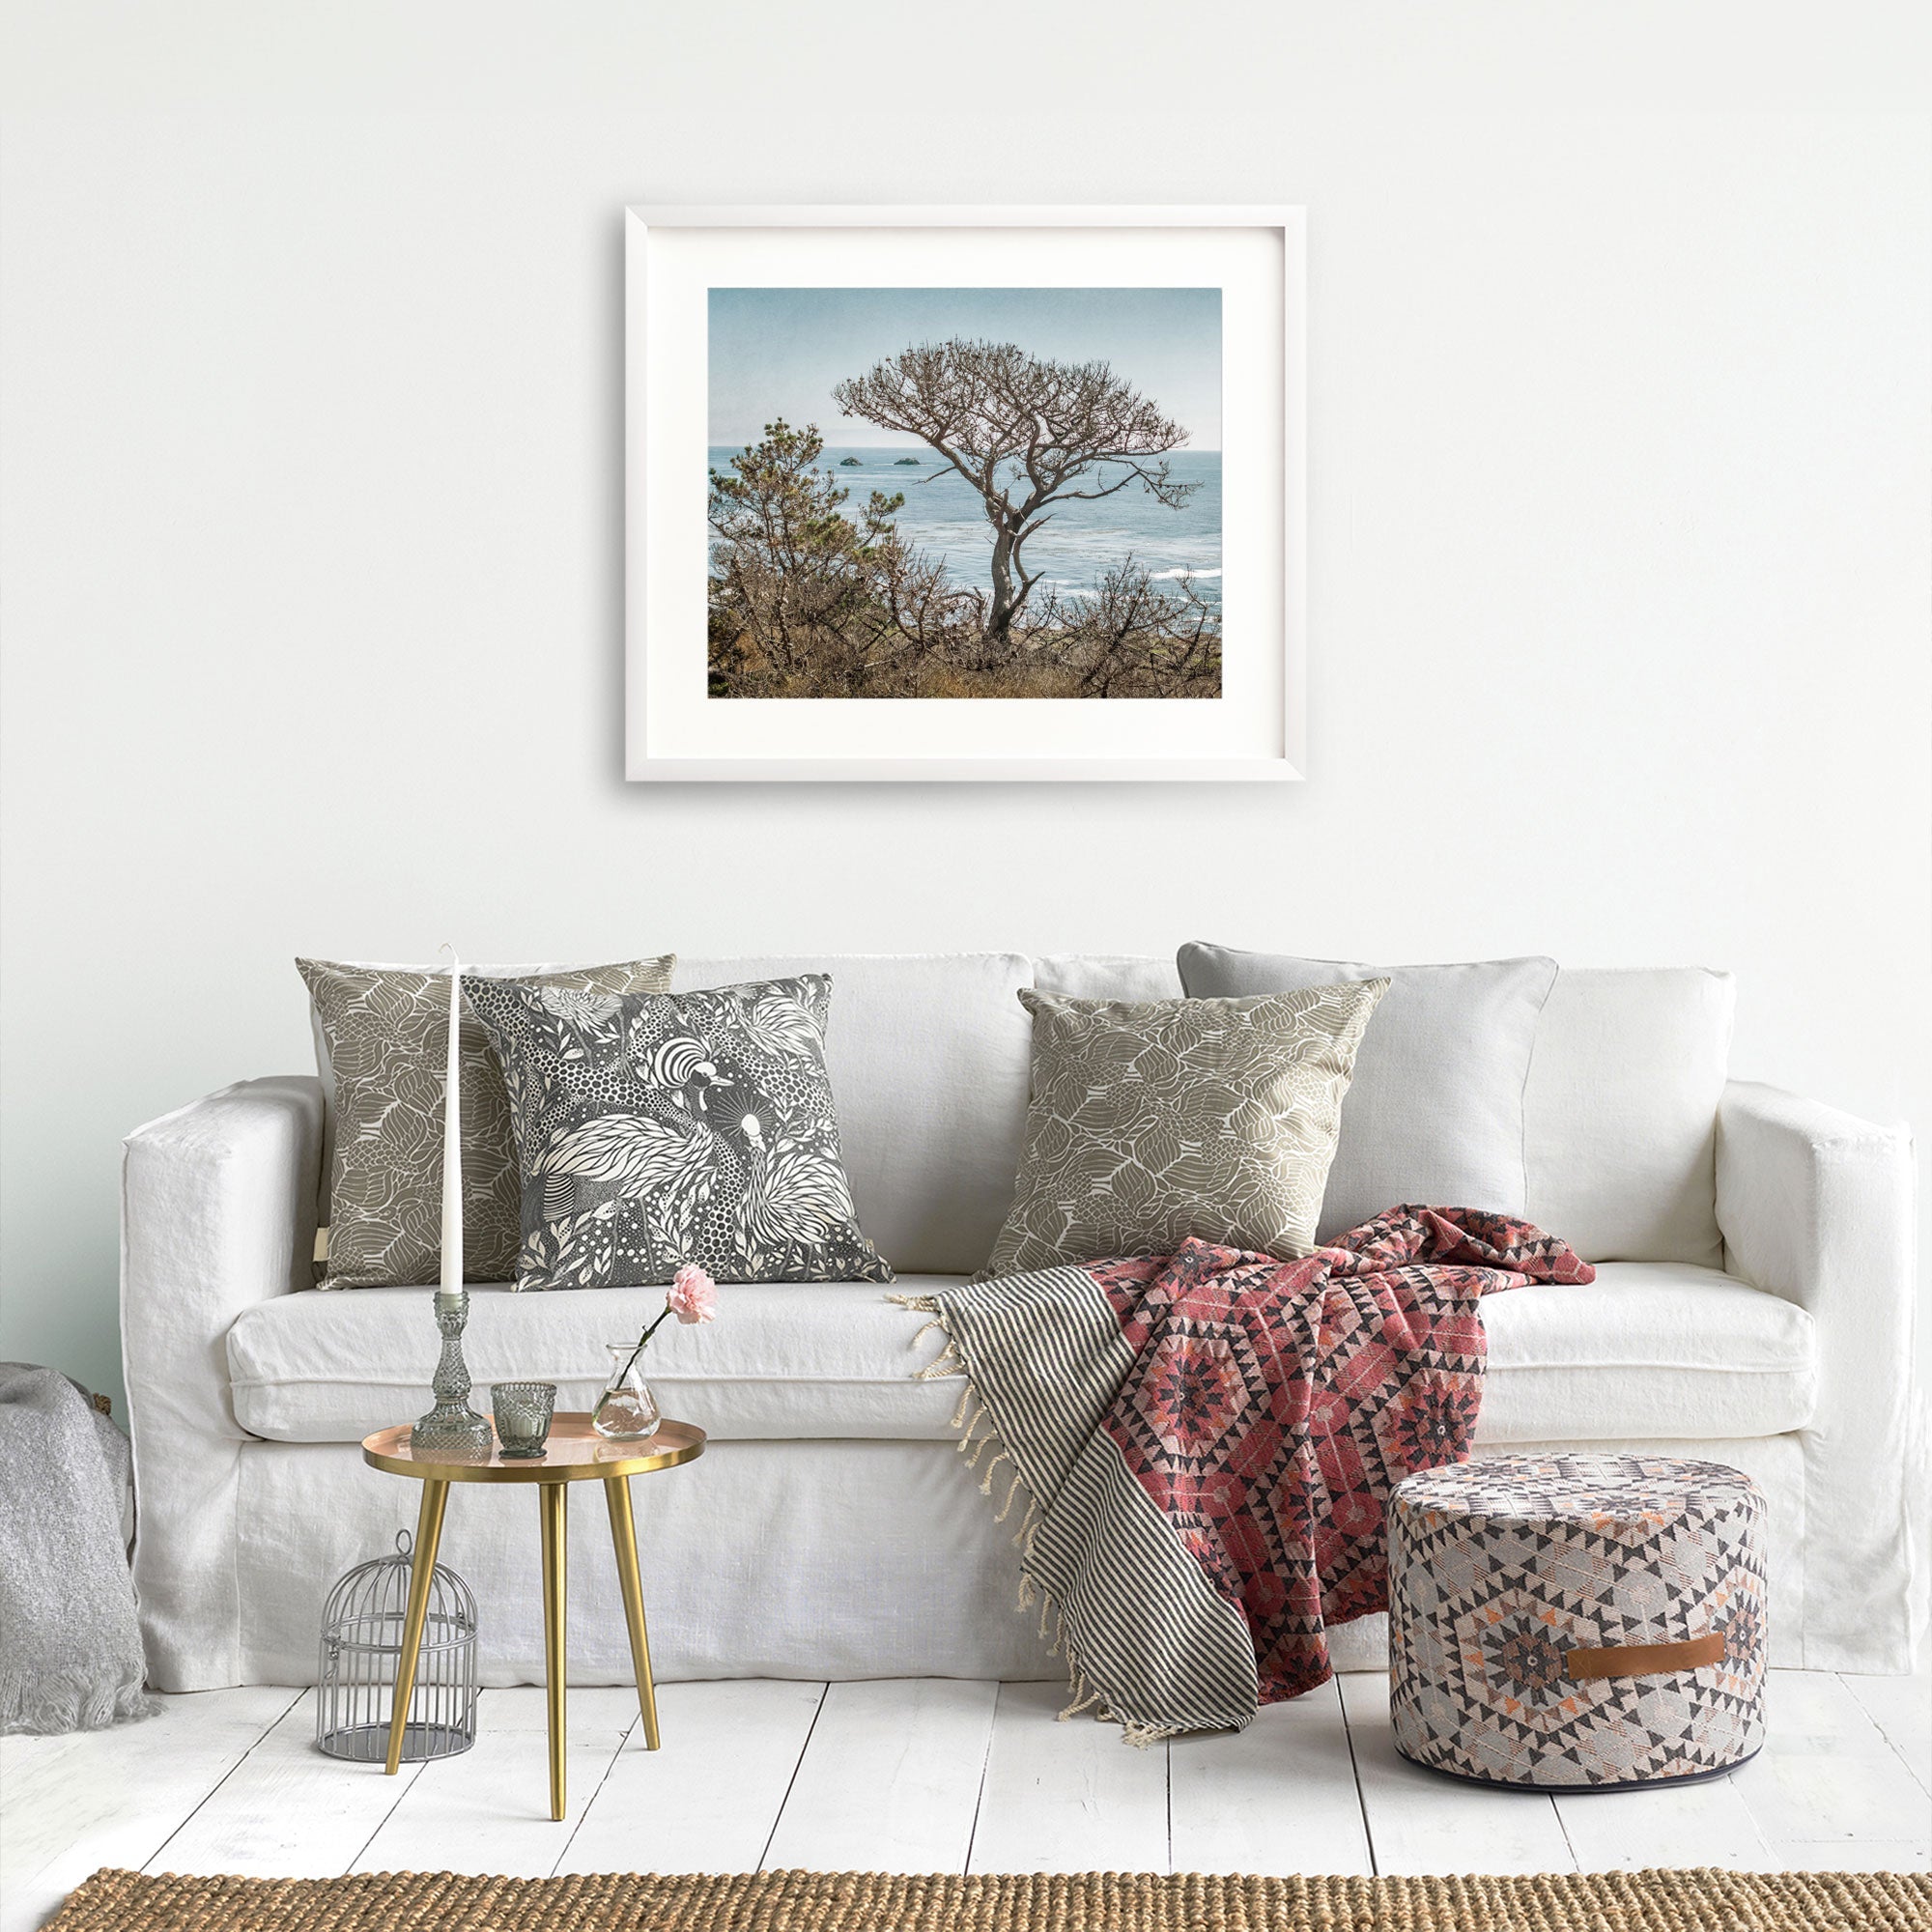 A cozy living room with a white sofa adorned with decorative pillows, a red patterned throw blanket, a small round table with a vase and books, and unframed Offley Green California Landscape Art in Big Sur, 'Wind Blown Tree' photography on the wall.